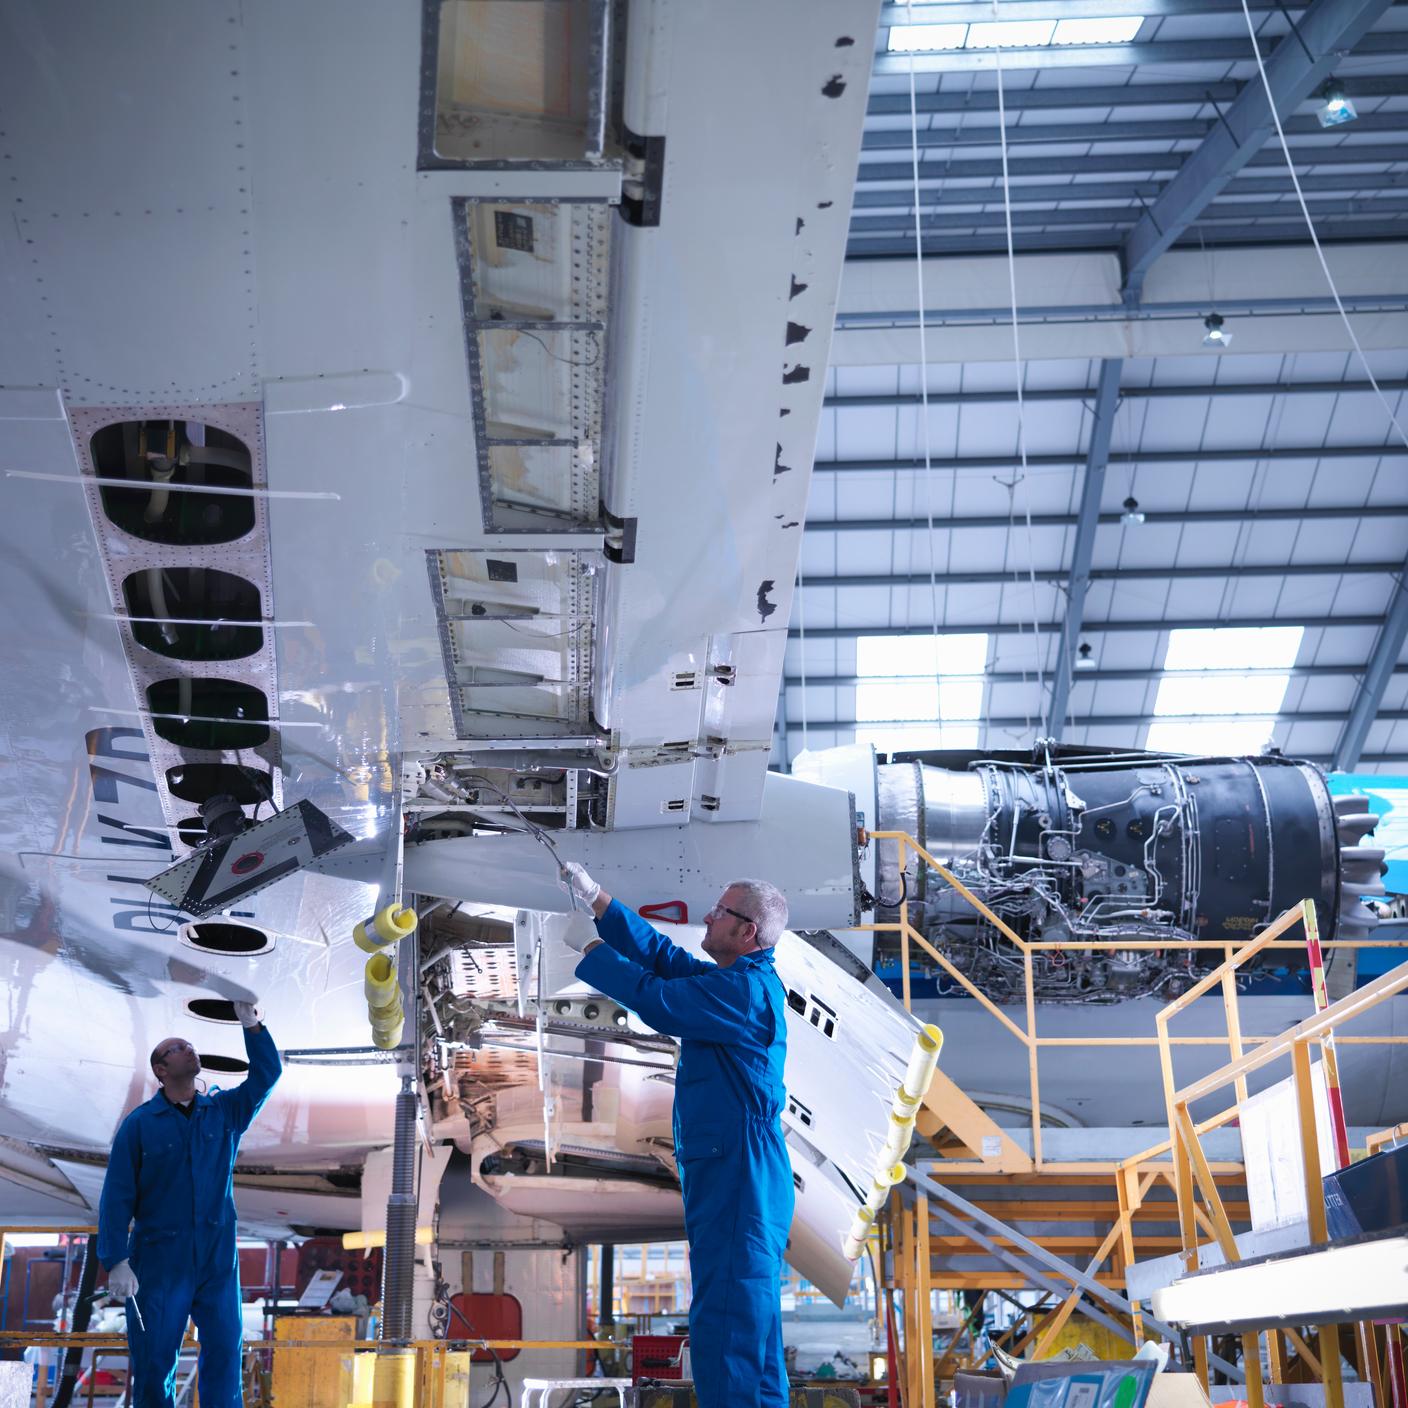 Aircraft engineers working on underside of wing of 737 jet plane